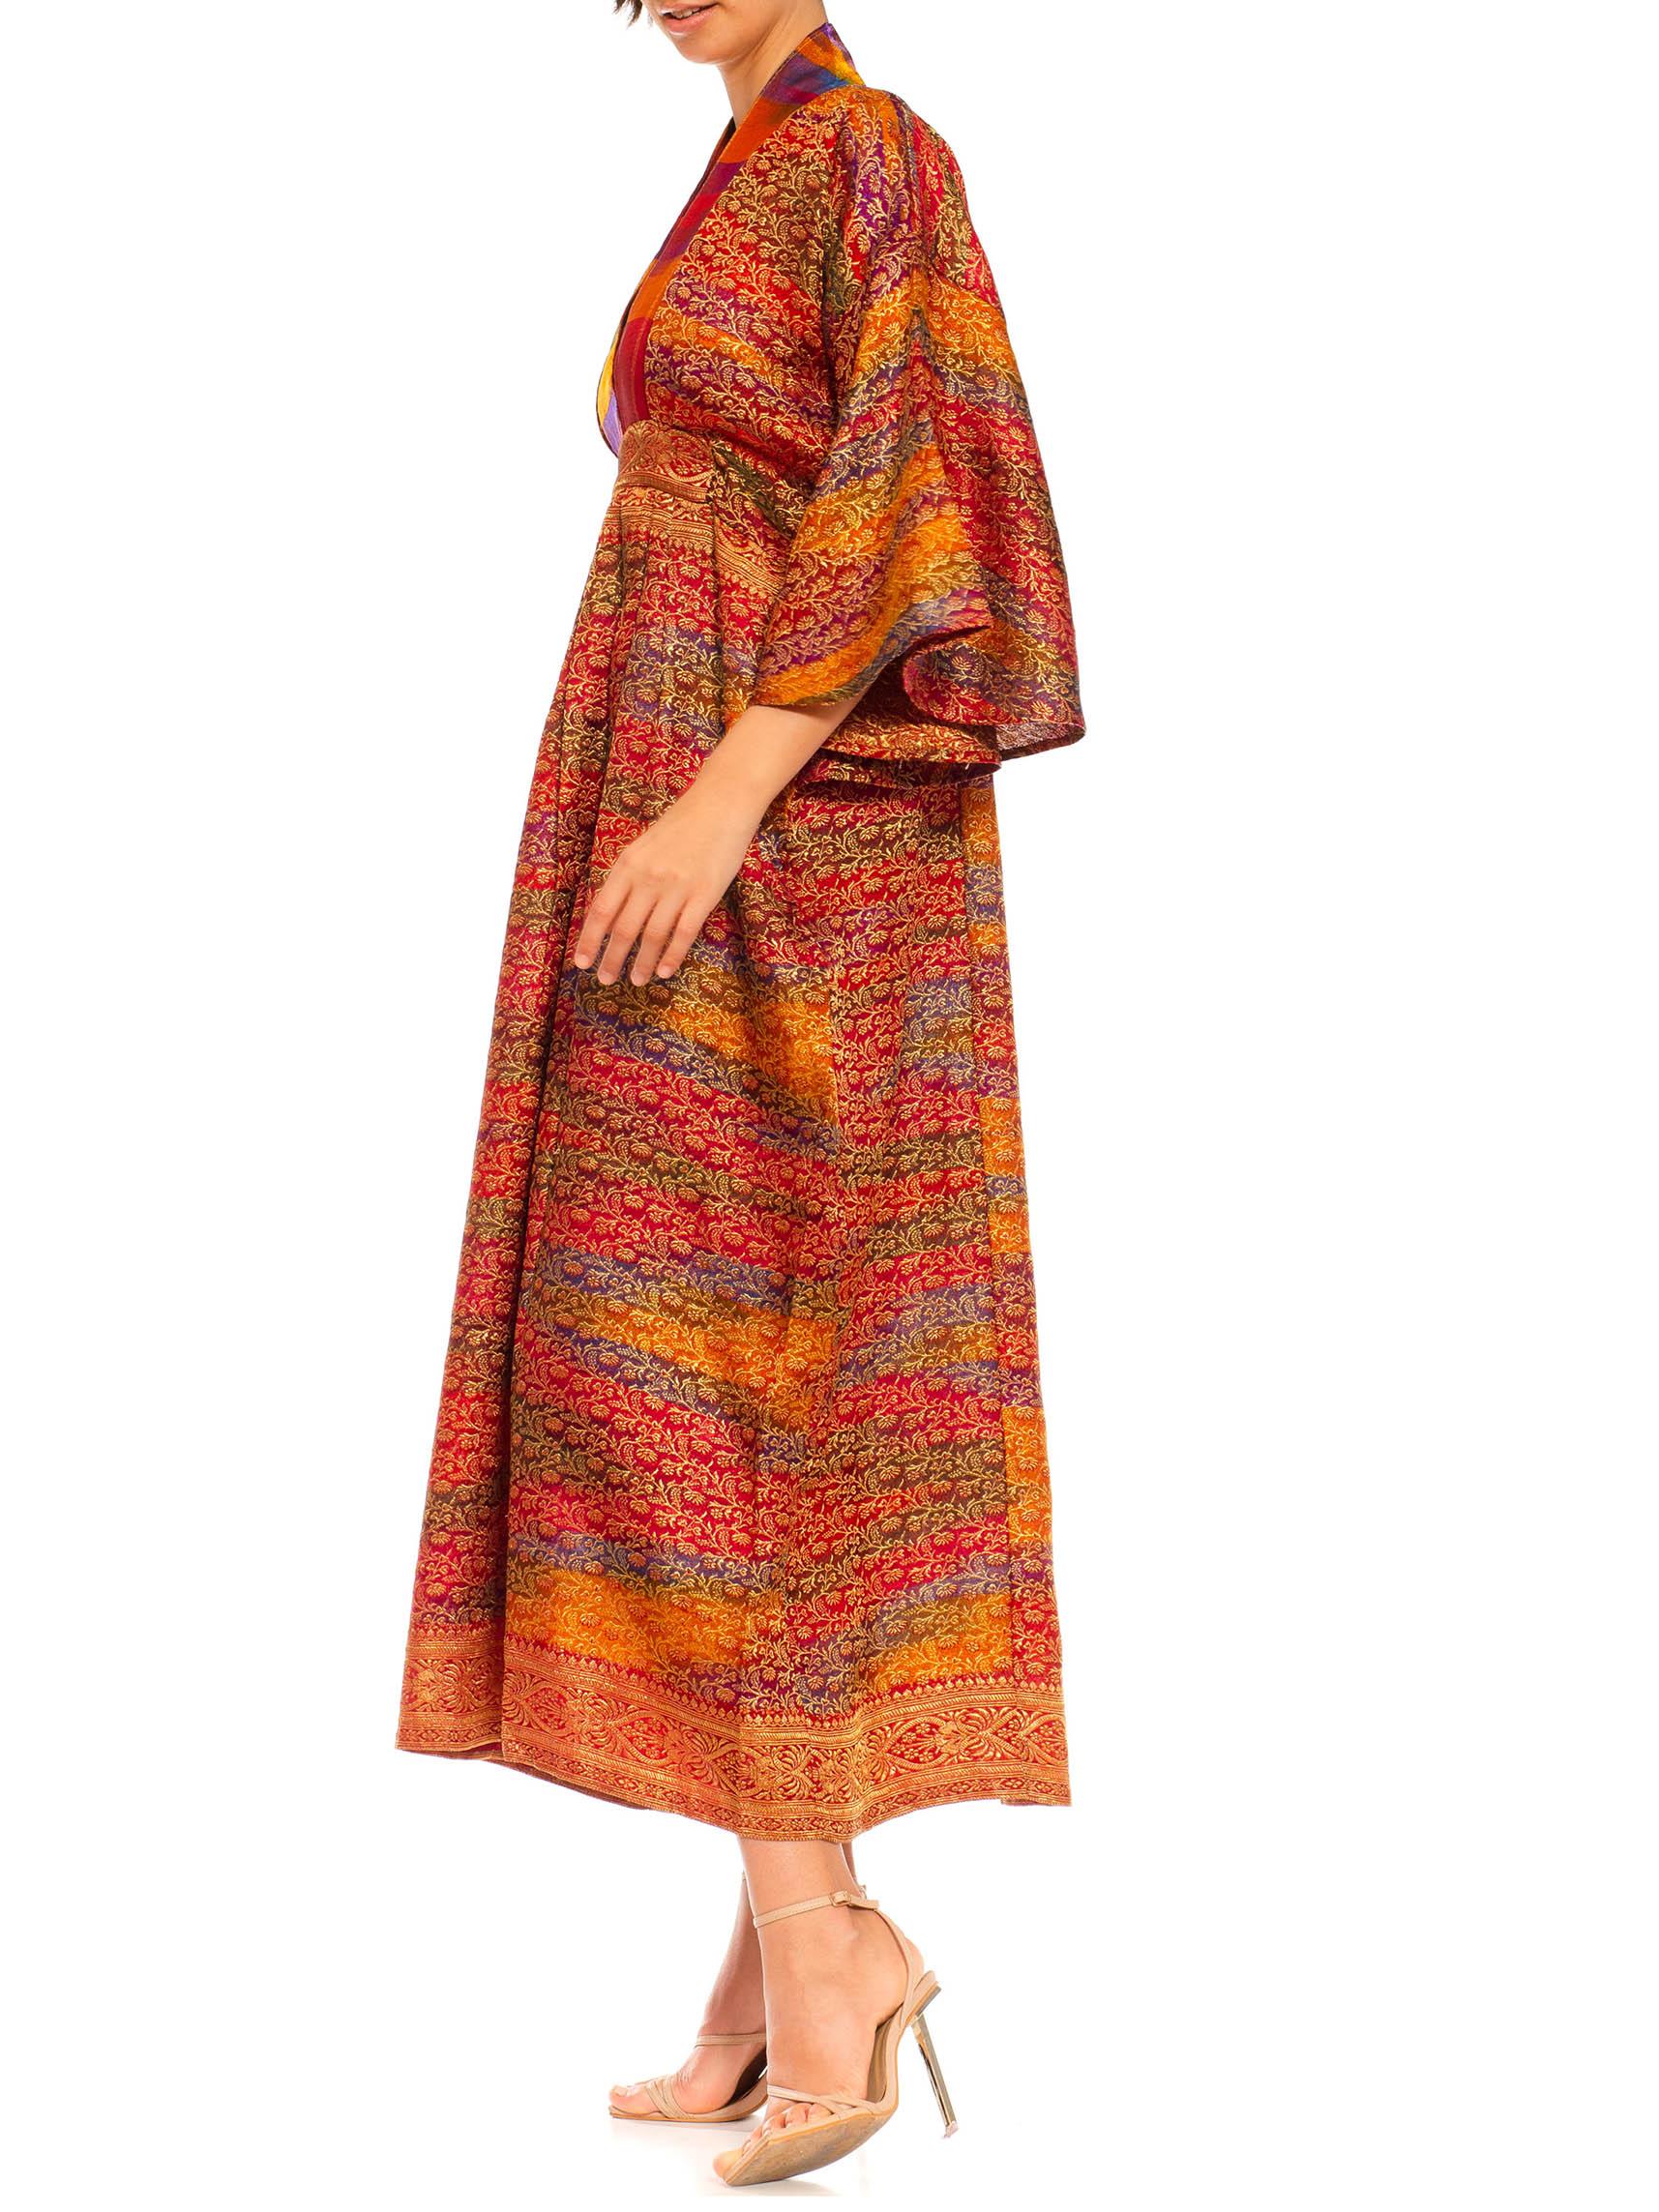 MORPHEW COLLECTION Multicolor & Metallic Gold Silk Paisley Kaftan Made From Vintage Saris
MORPHEW COLLECTION is made entirely by hand in our NYC Ateliér of rare antique materials sourced from around the globe. Our sustainable vintage materials